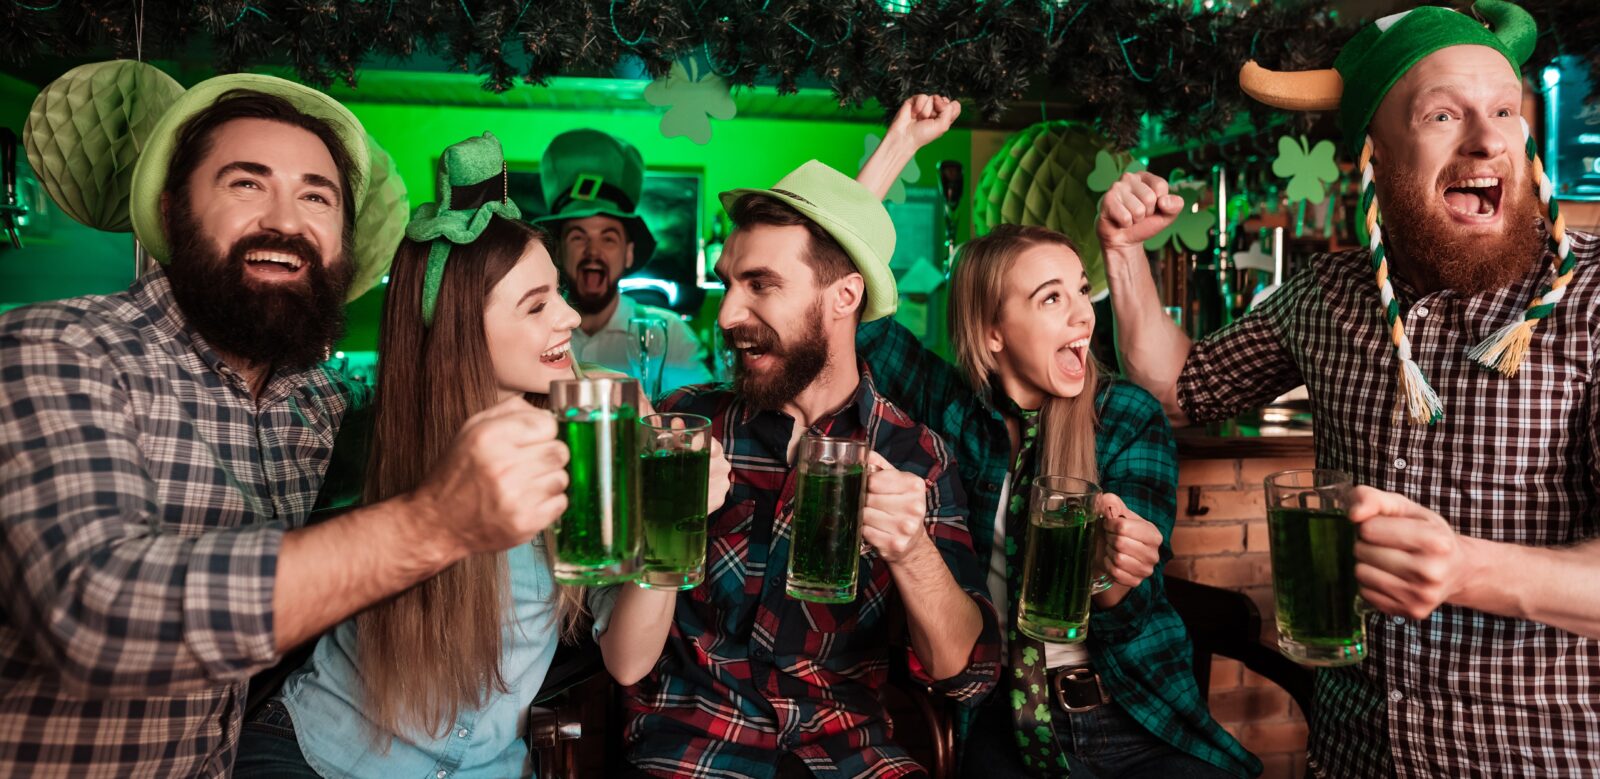 Do The Almost St. Patty’s Day Crawl in Santa Ana!